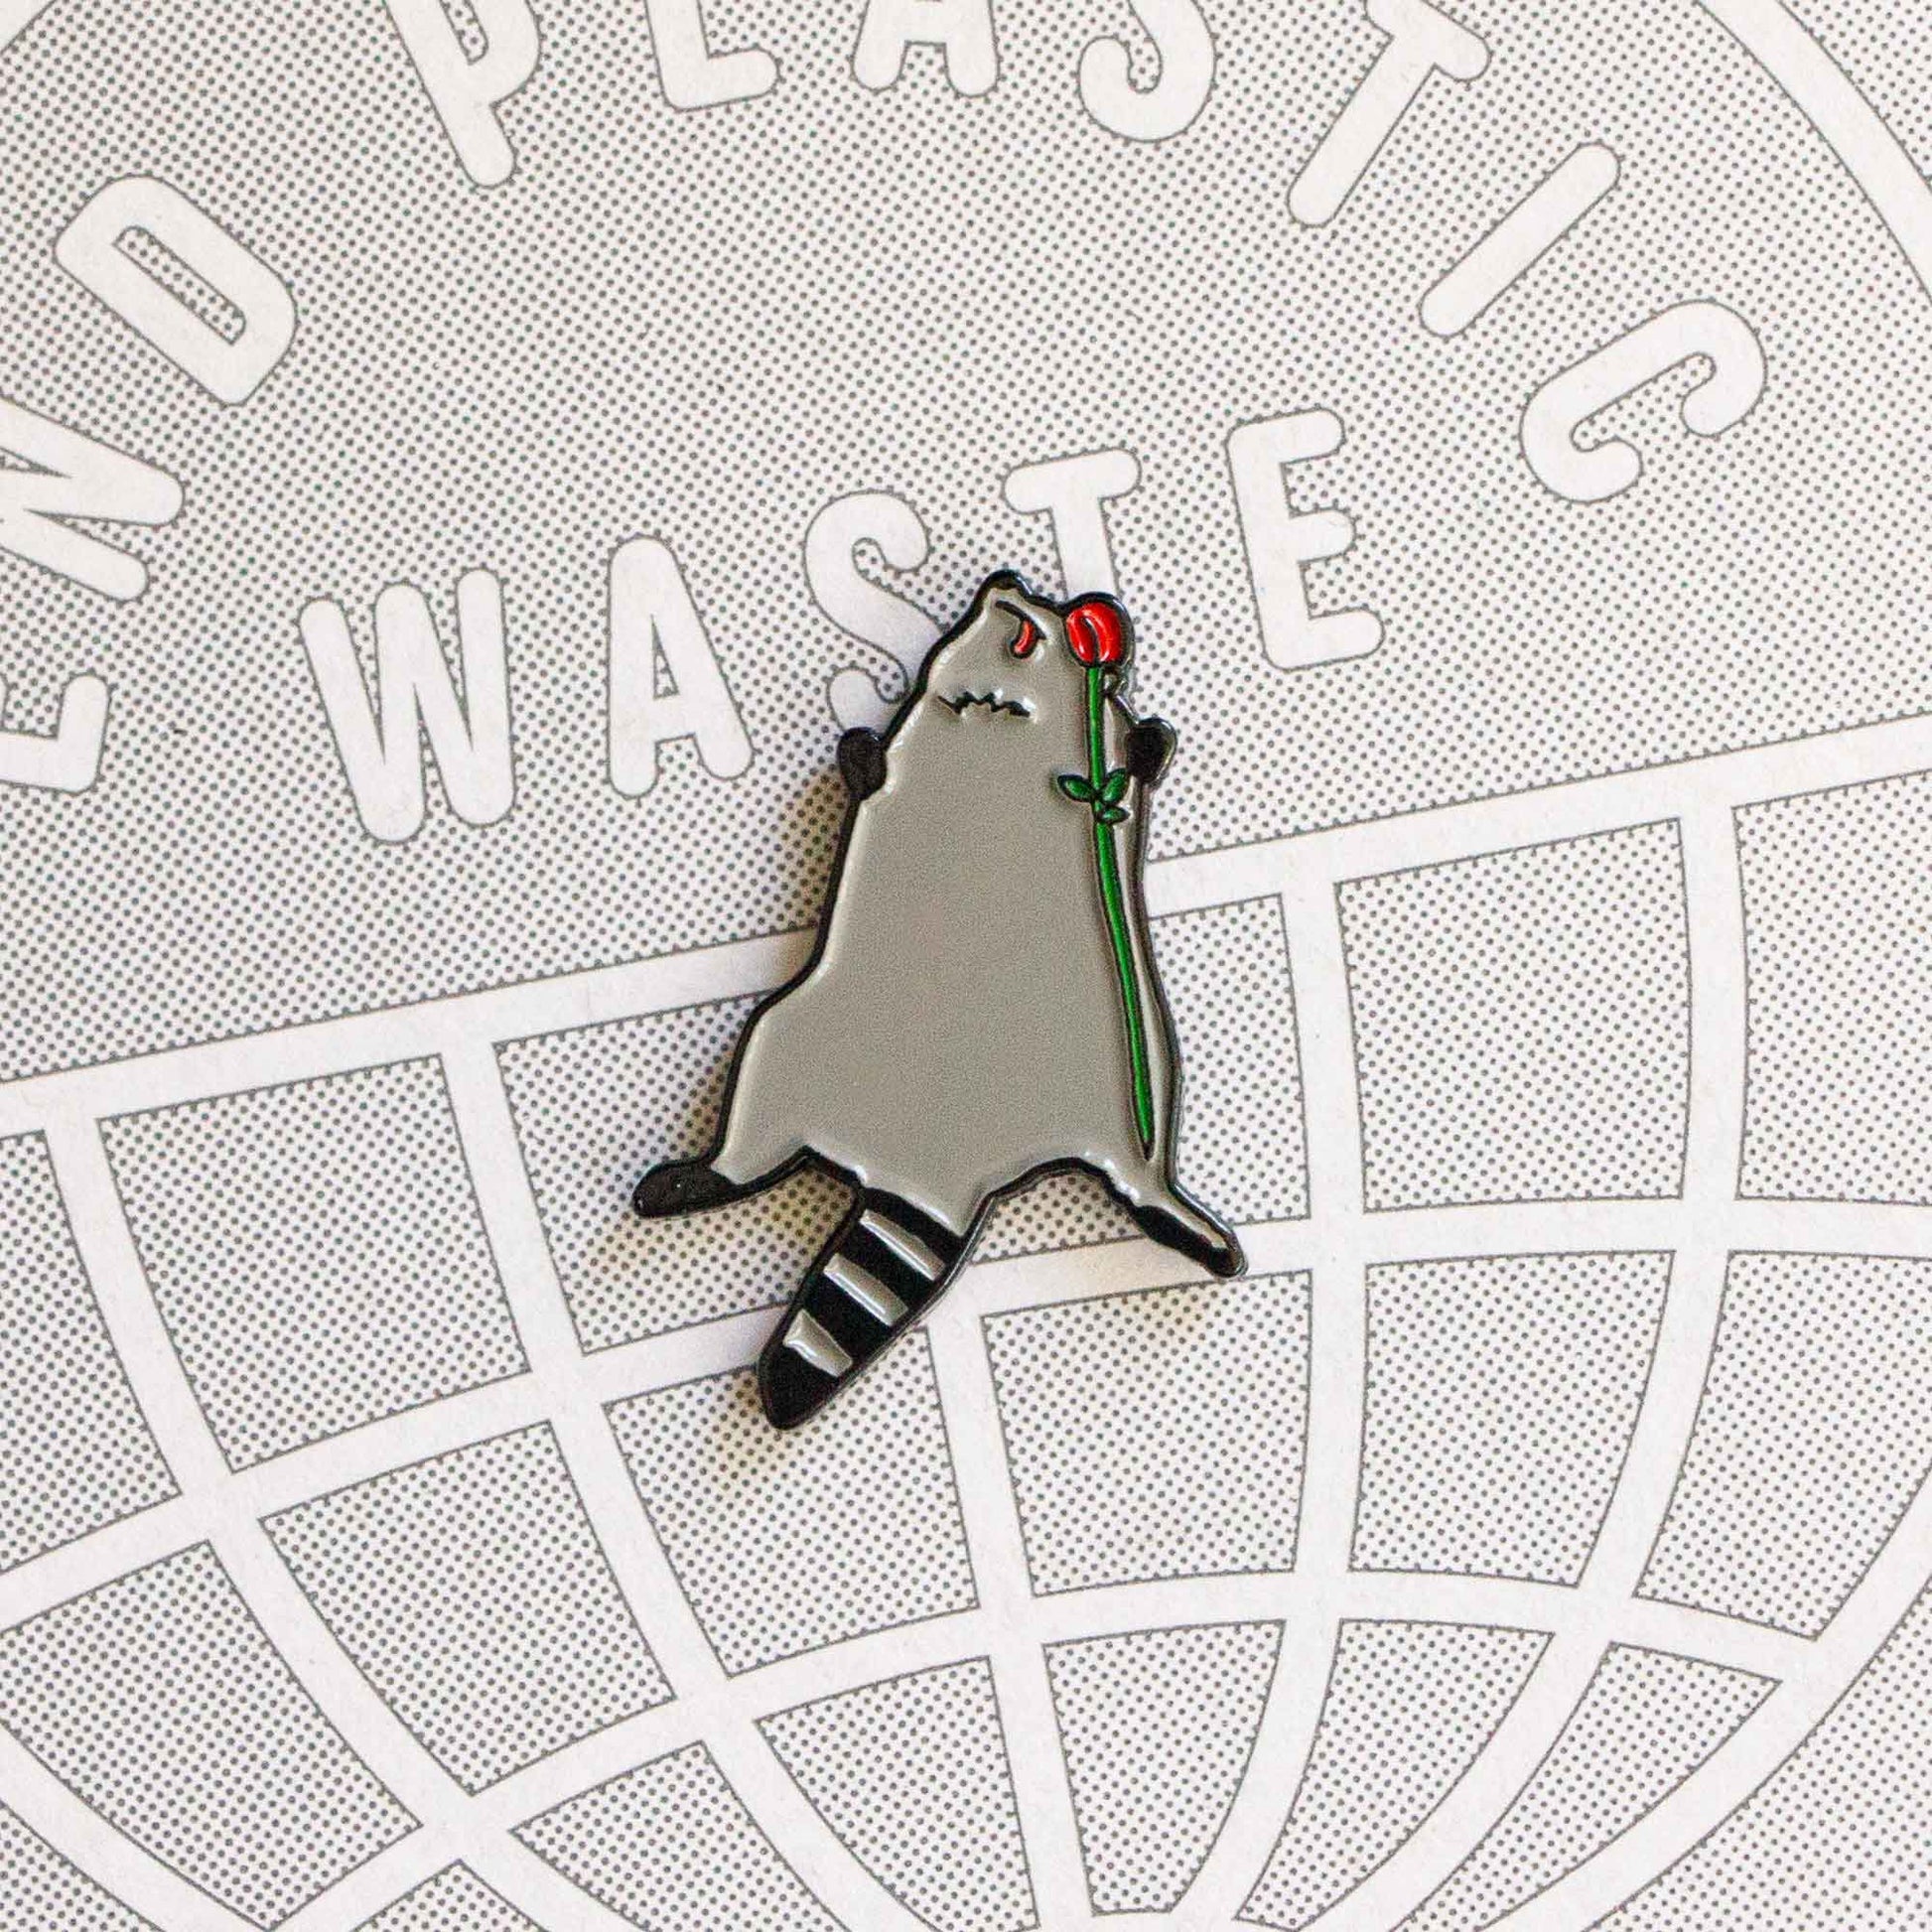 An enamel pin that is a parody of a Toronto raccoon roadkill that went viral from people throwing a memorial for it. The raccoon is laying lifeless with it's tongue out, holding a rose.